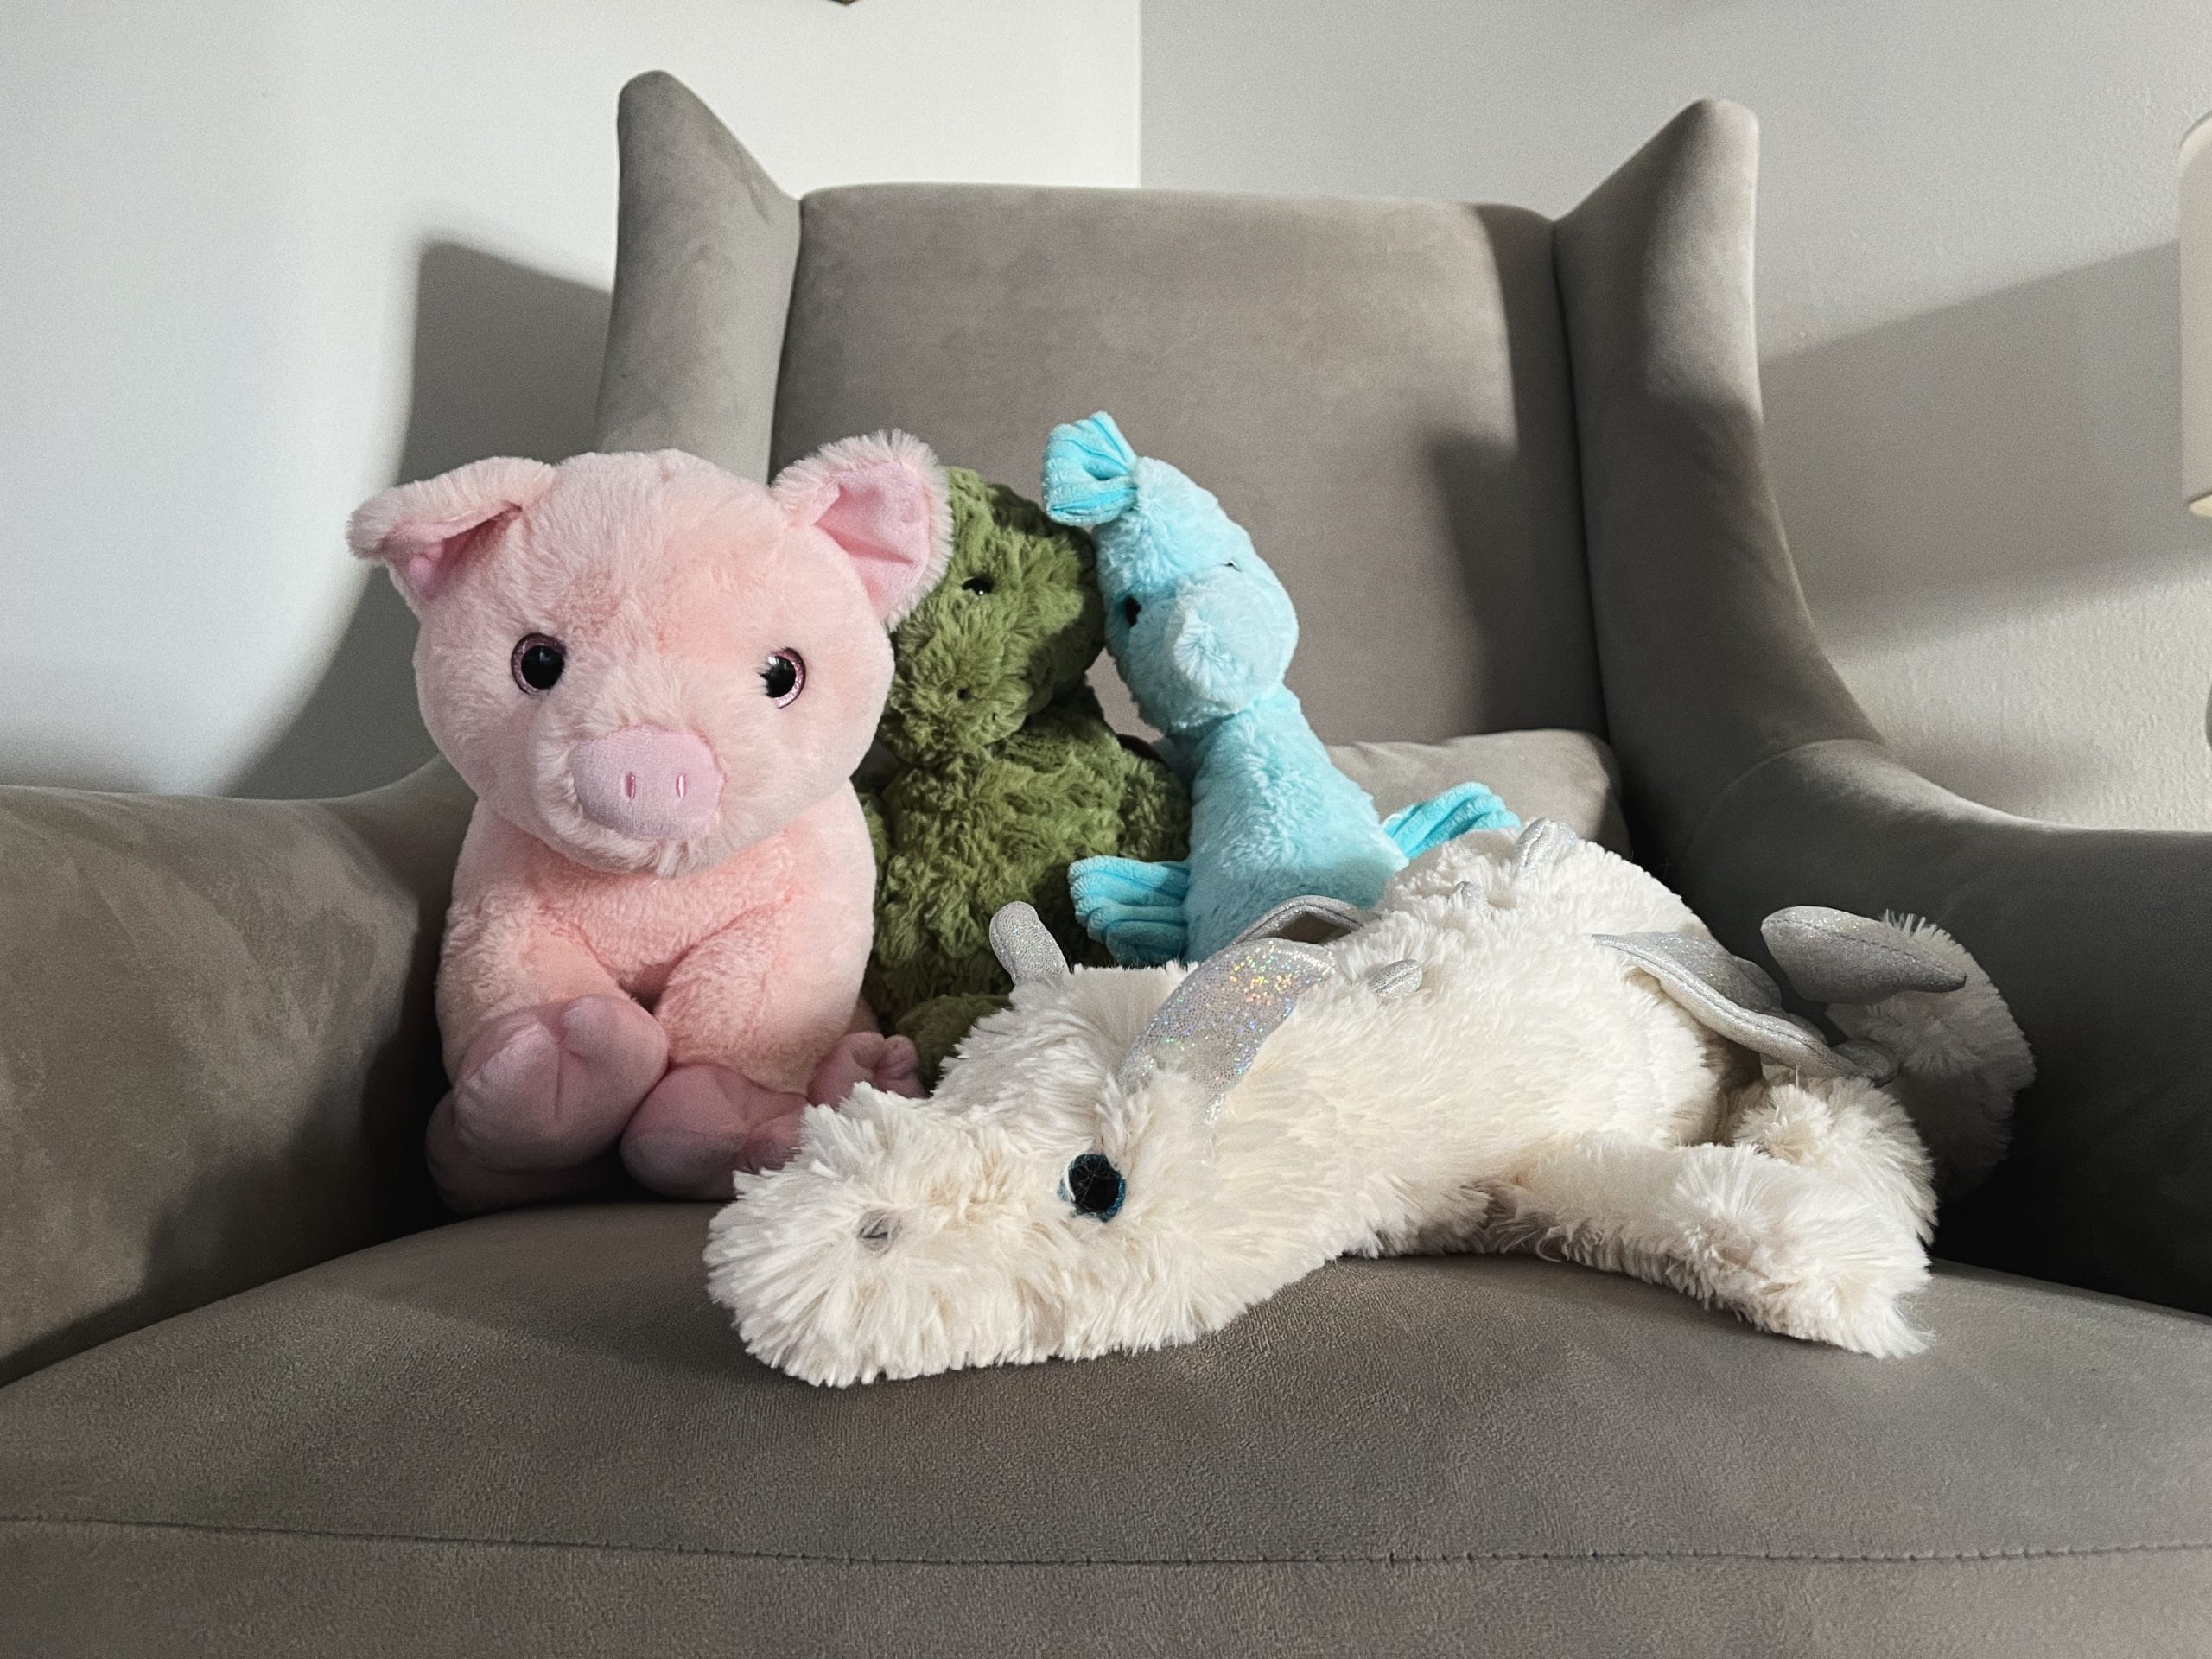 Dog Weighted Stuffed Animal and Sensory Toy for Travel with Your Child -  Mosaic Weighted Blankets